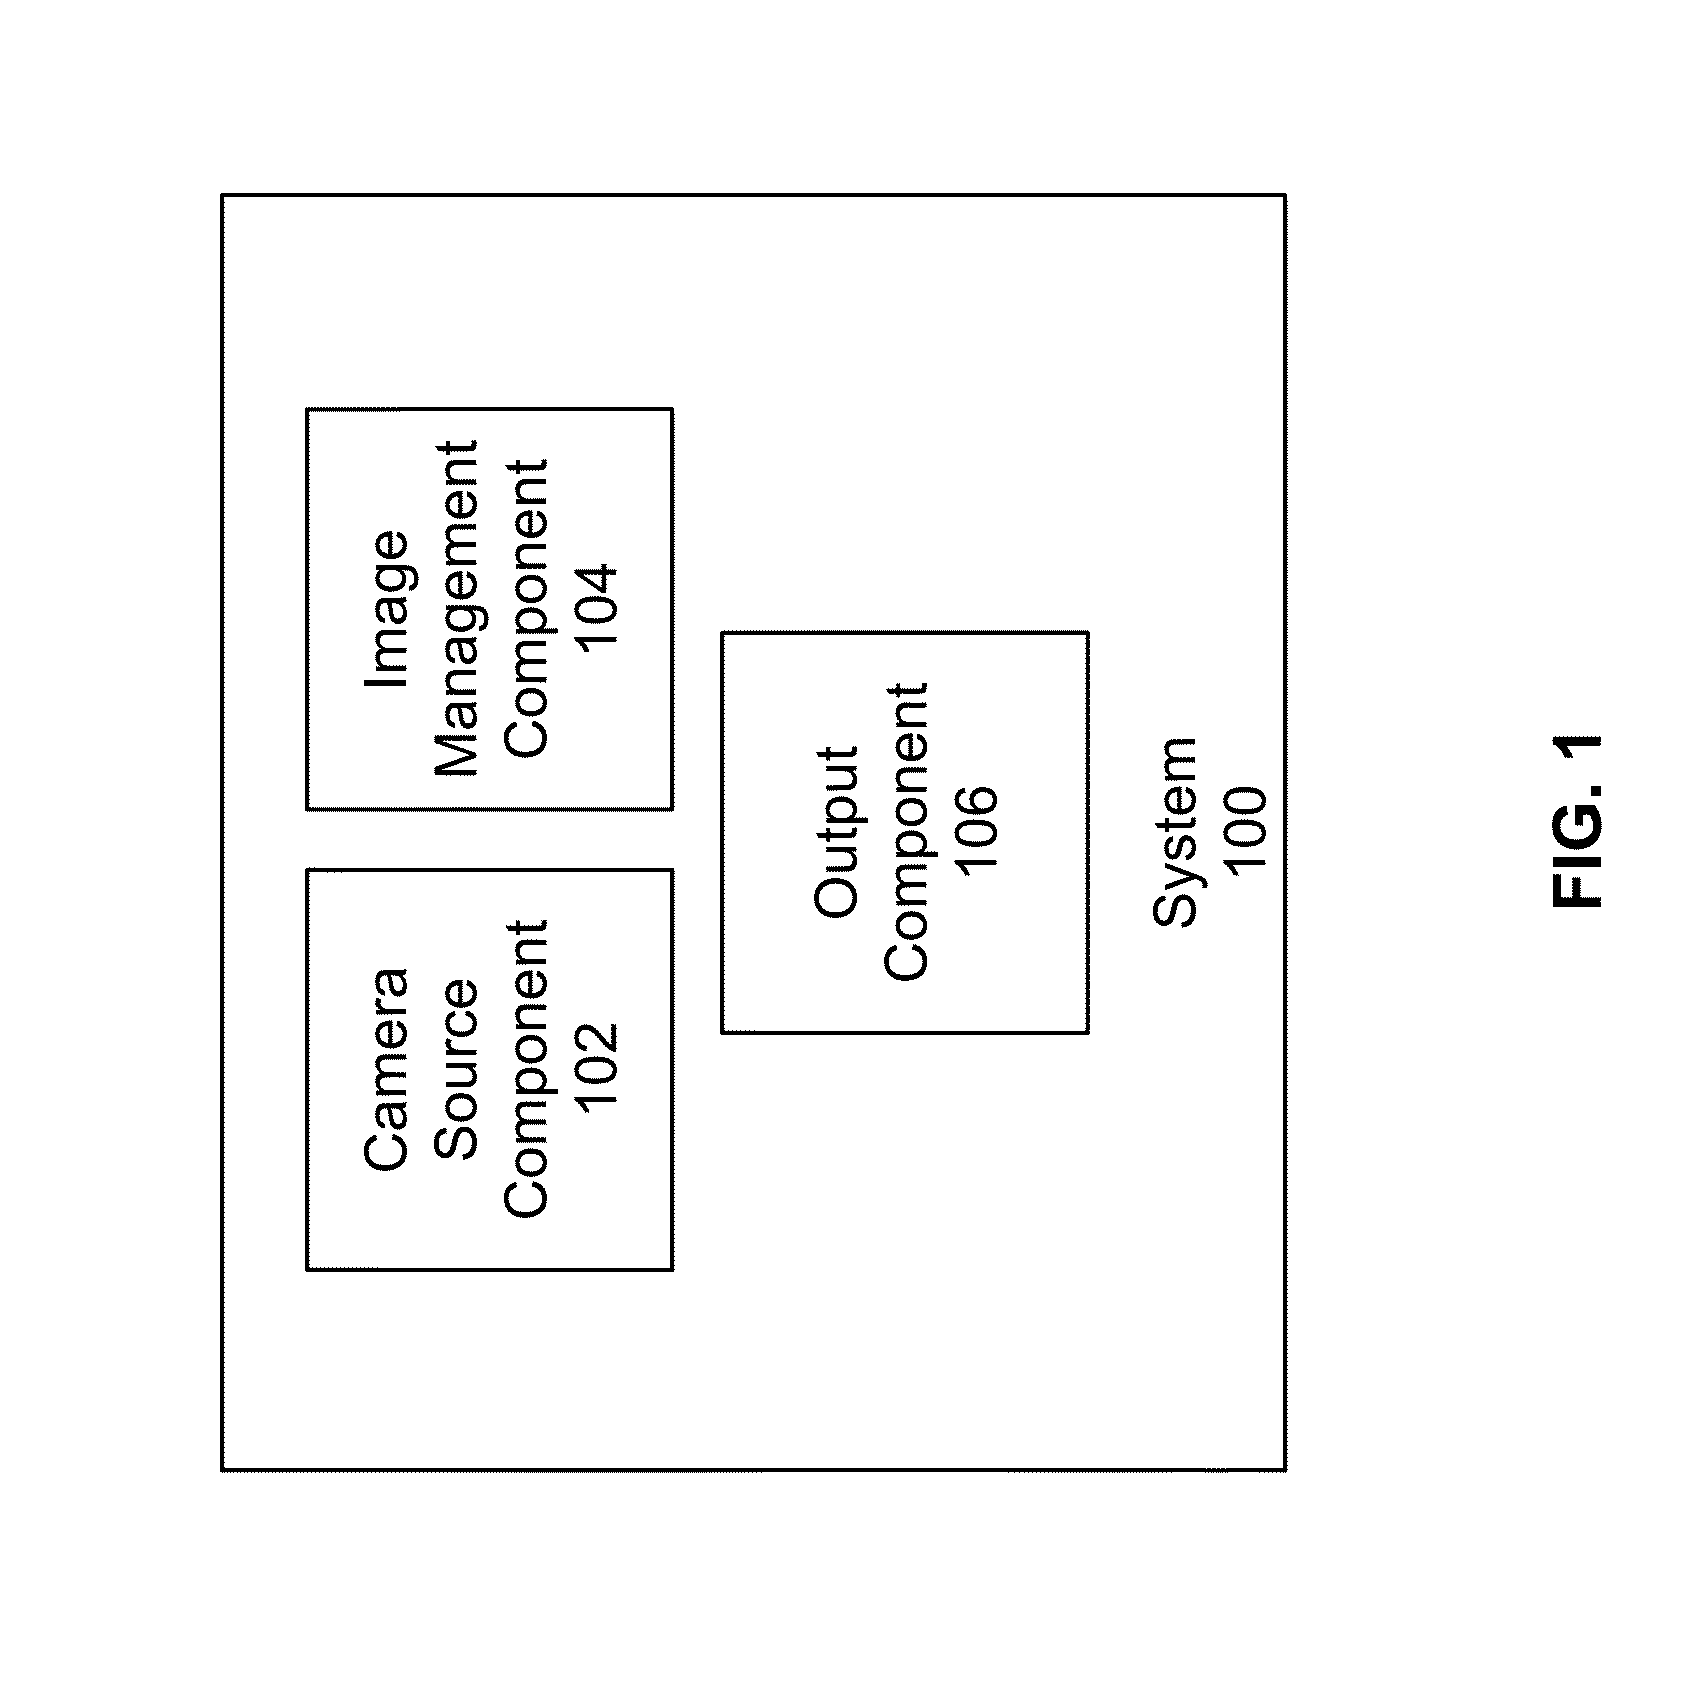 System and methods for video image processing